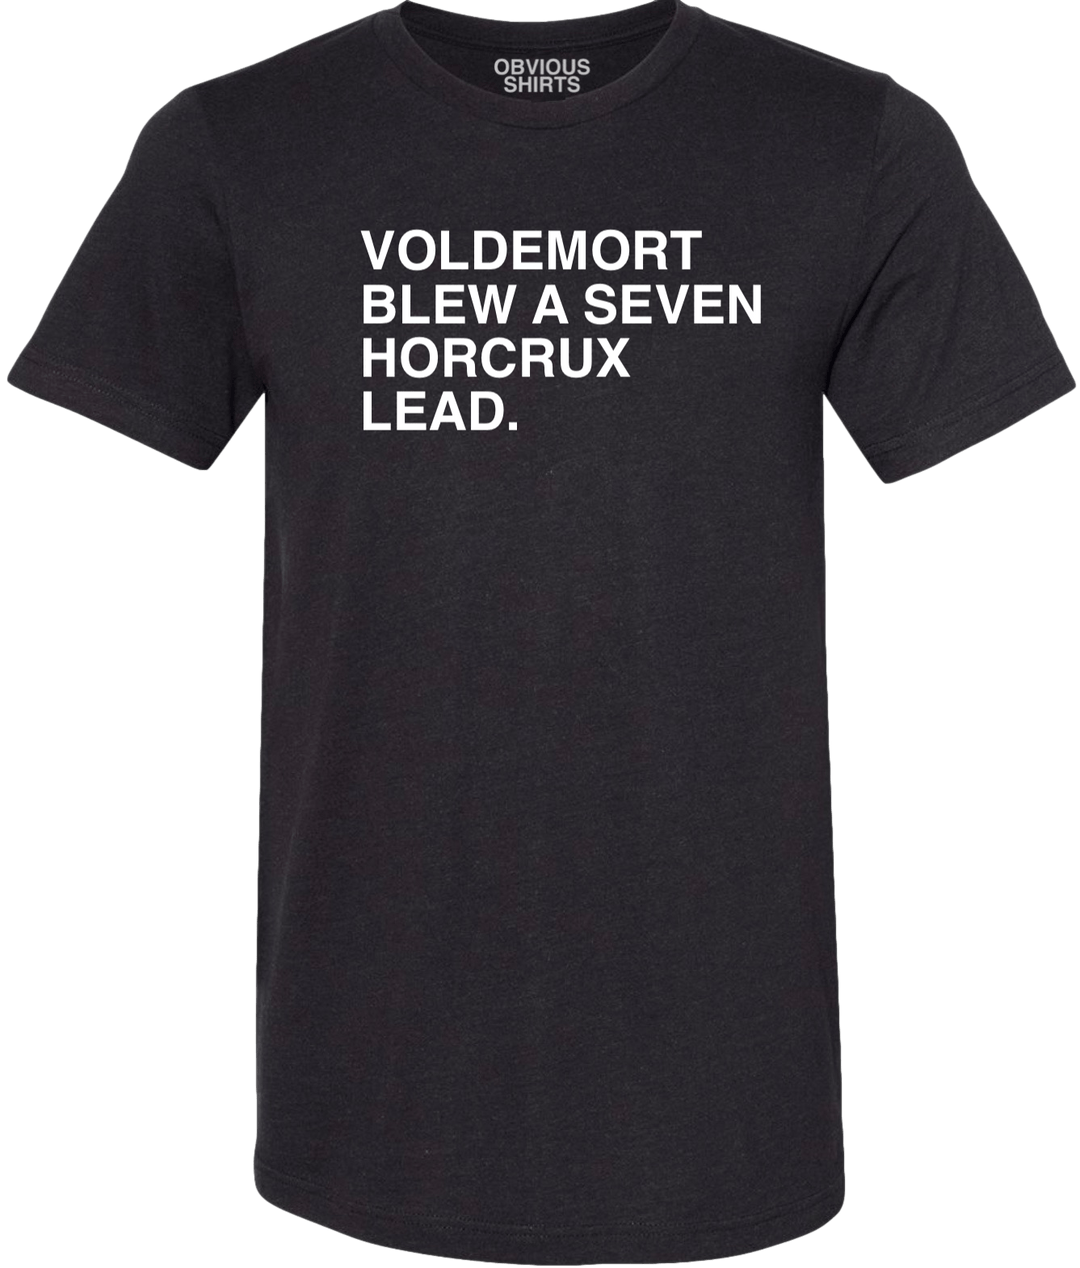 VOLDEMORT BLEW A SEVEN HORCRUX LEAD. - OBVIOUS SHIRTS